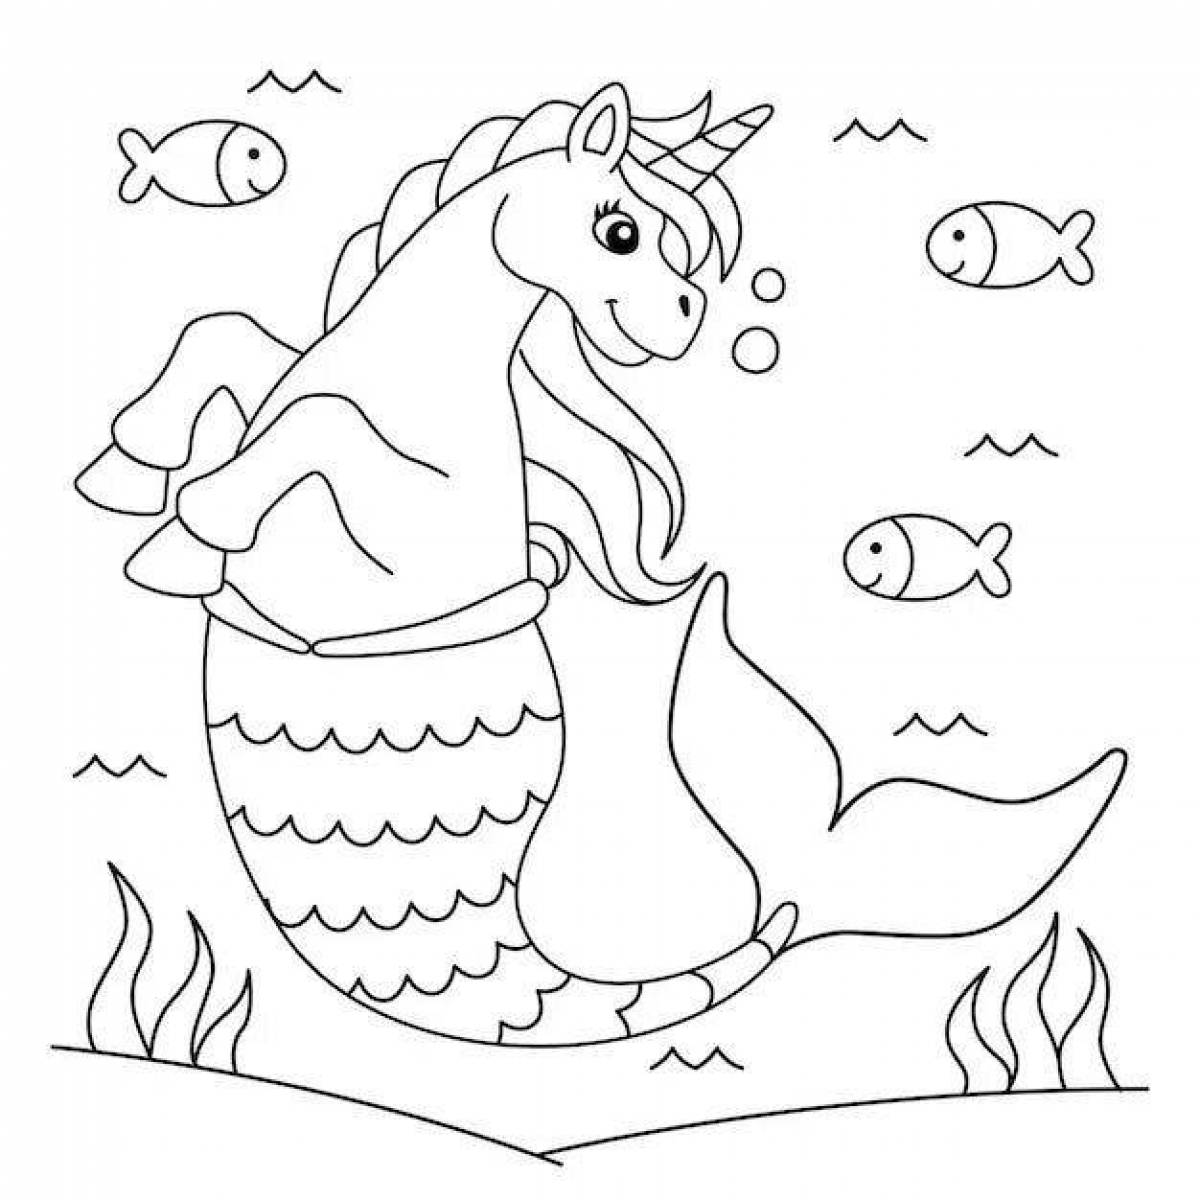 Coloring page exalted mermaid unicorn